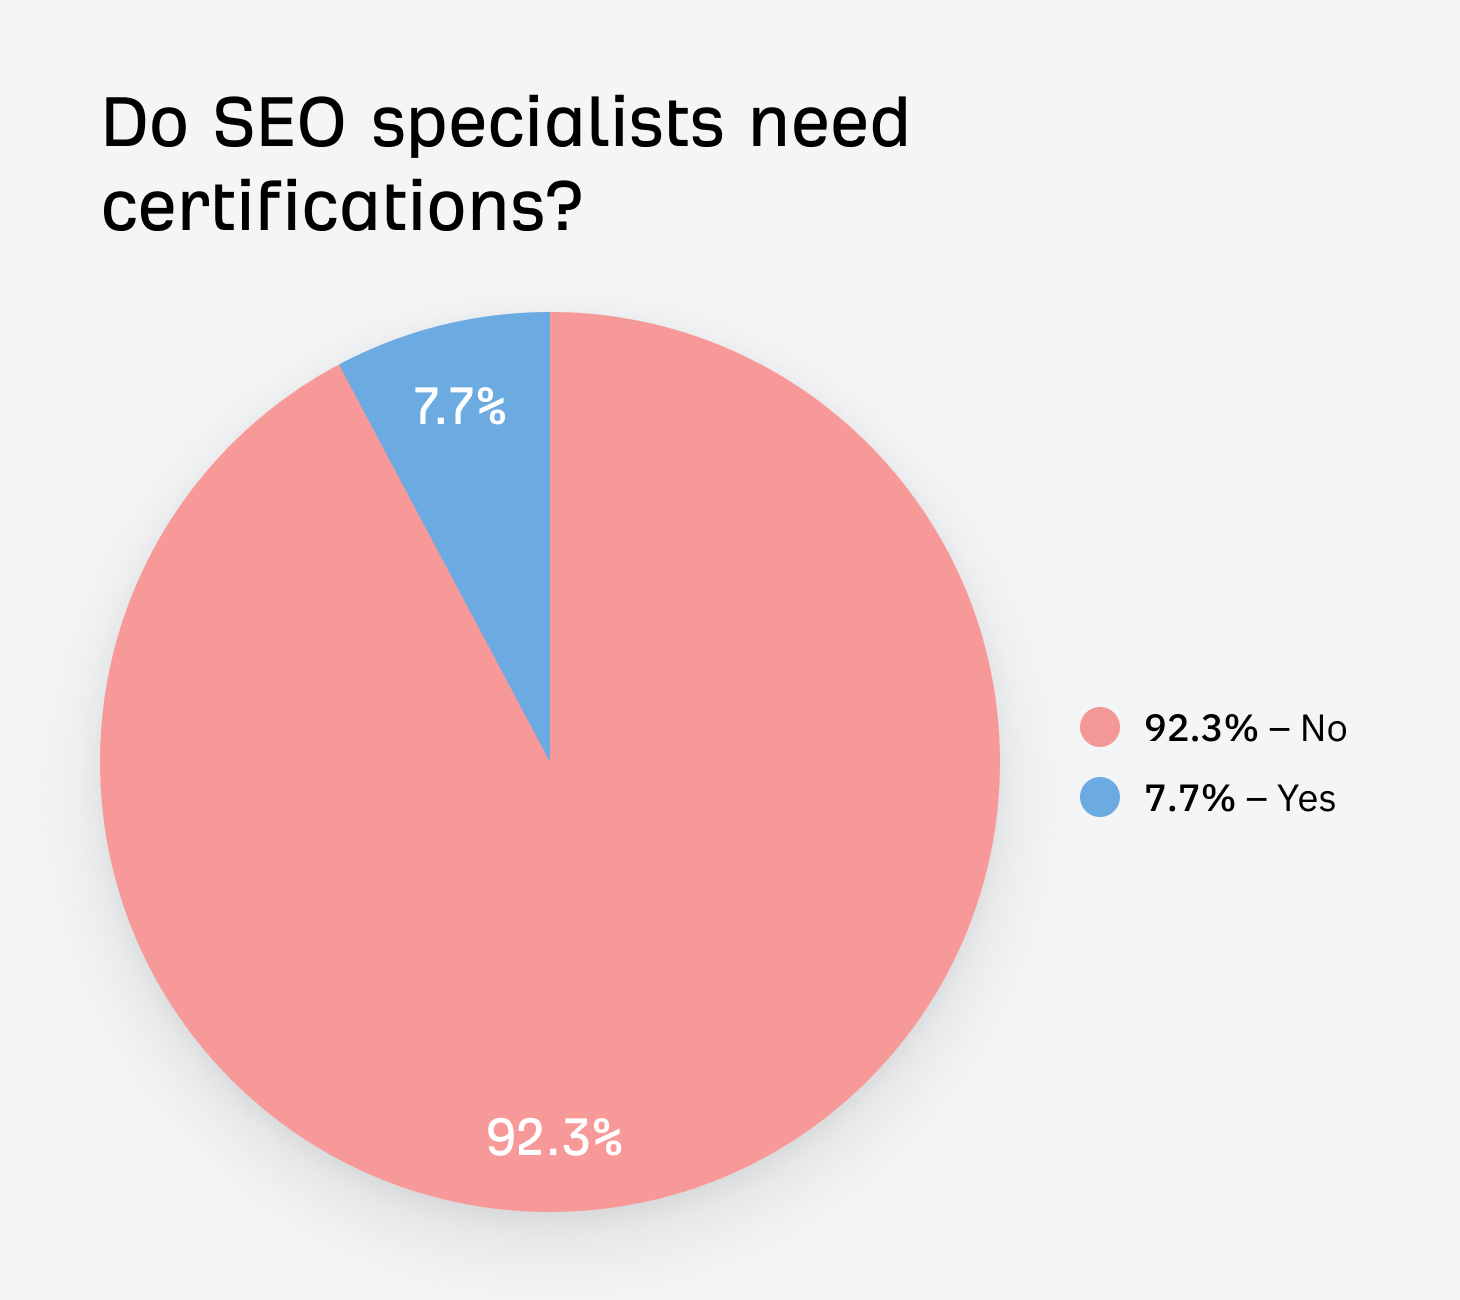 Chart showing whether SEO specialists need certifications